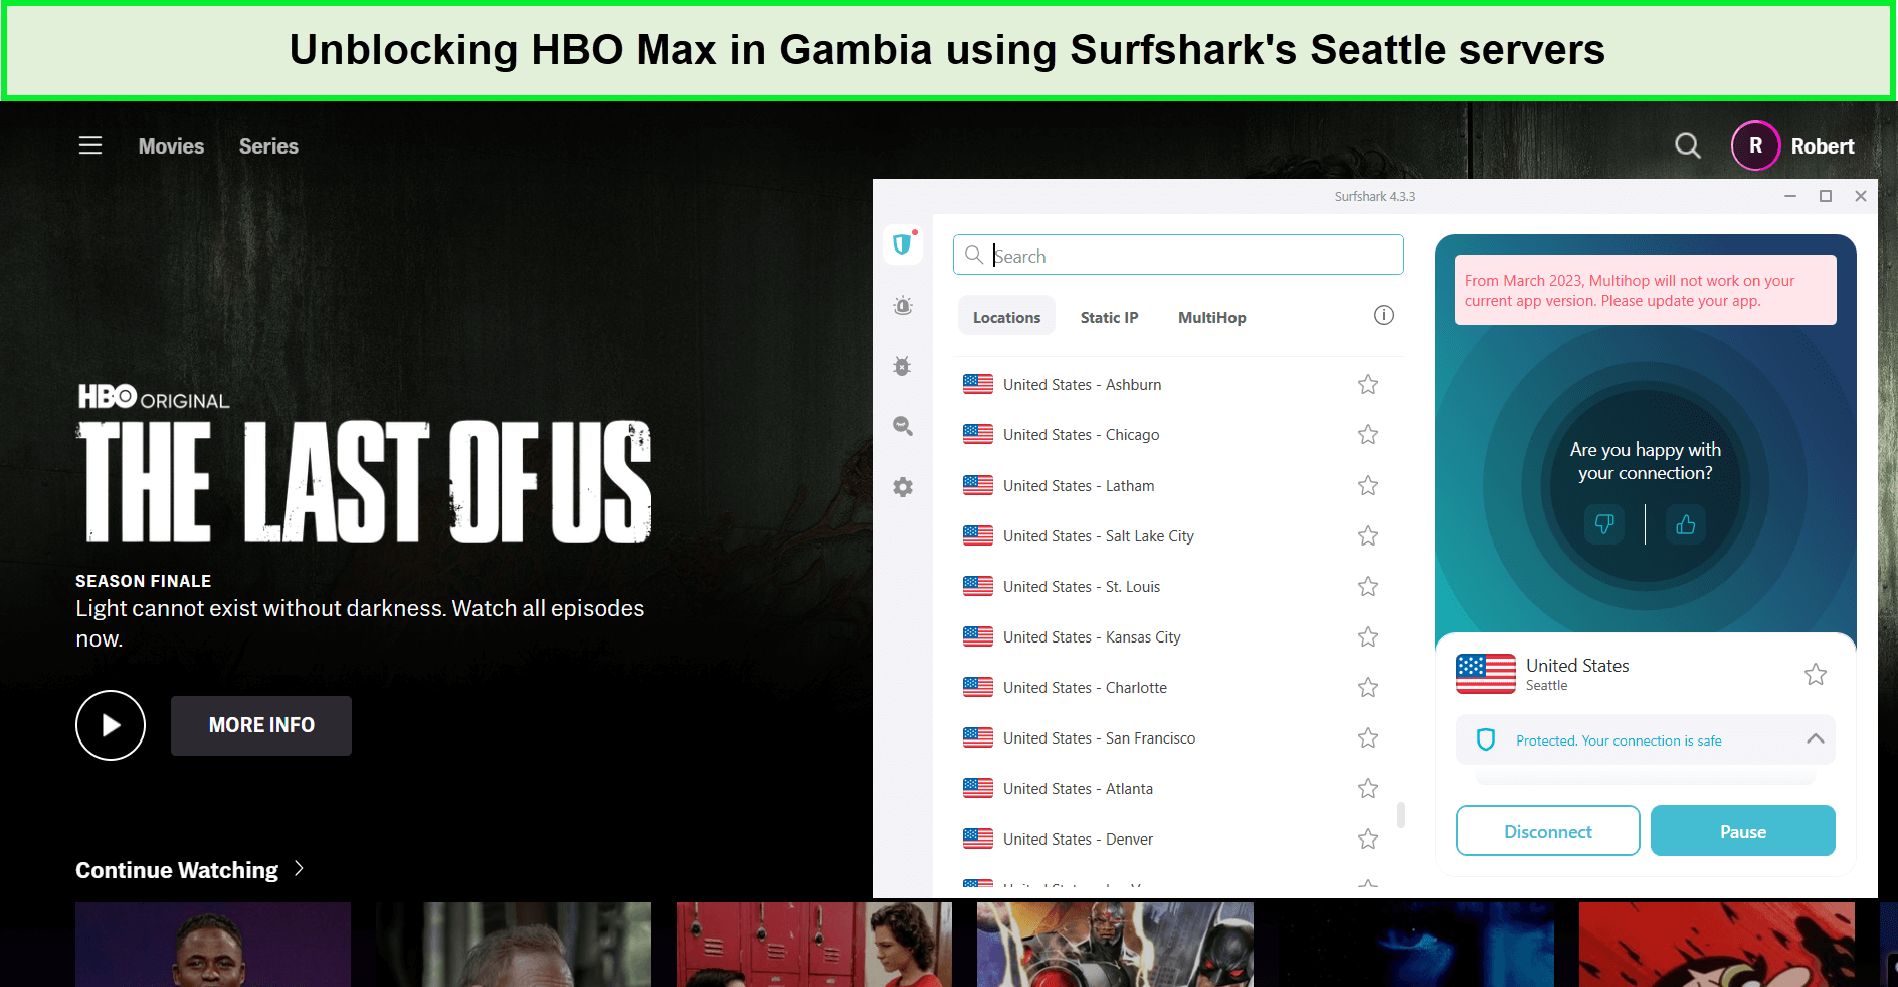 hbo-max-in-gambia-surfshark